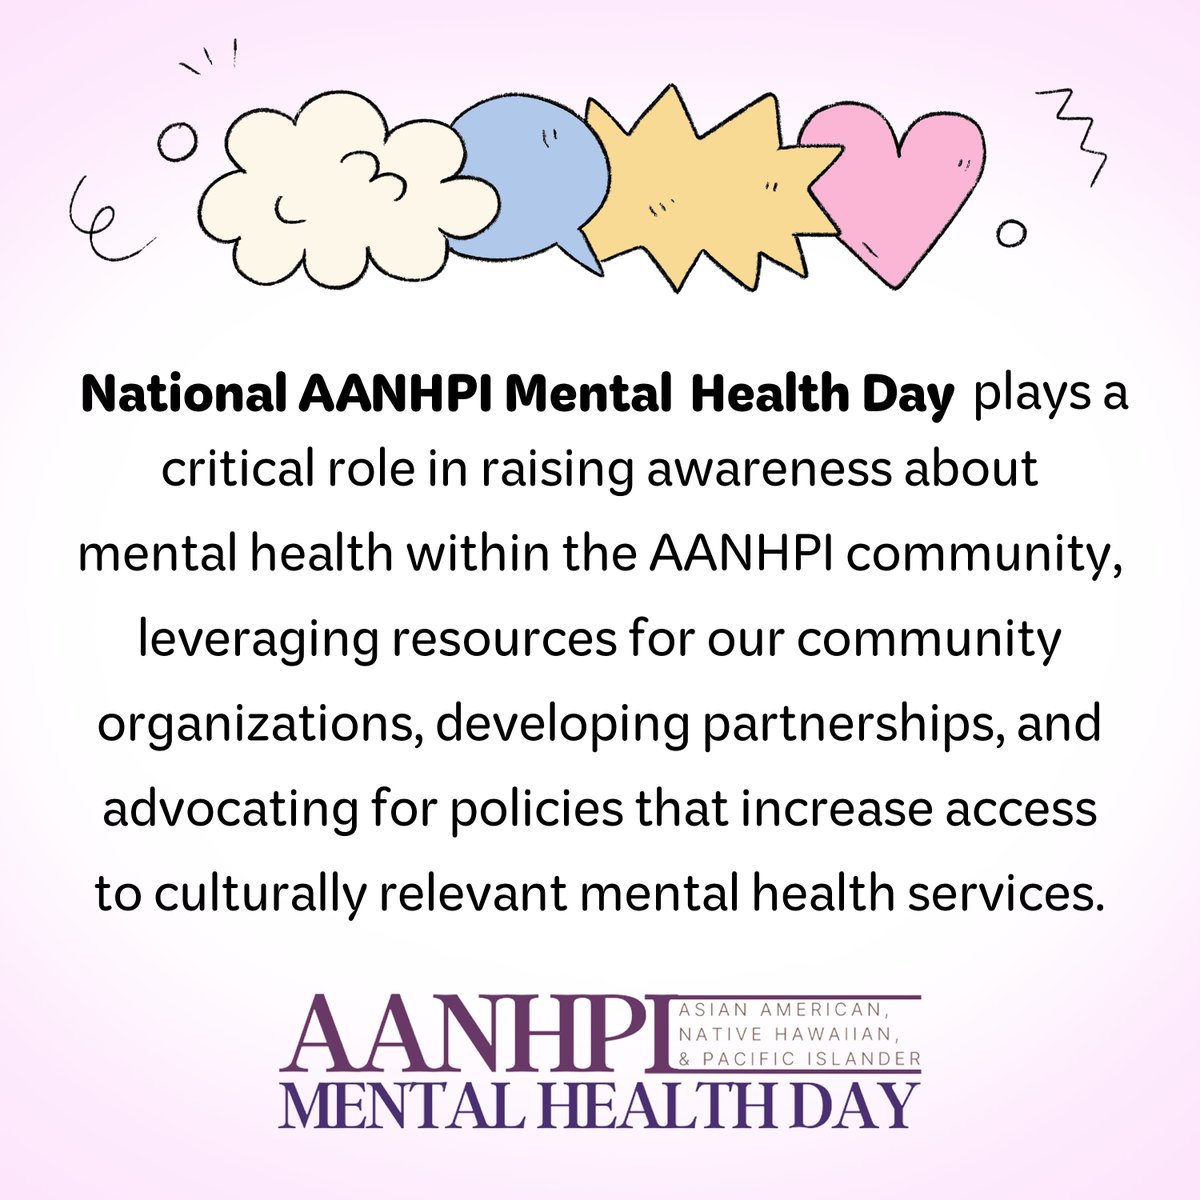 Proud to be a community partner of @NAAPIMHA’s 4th Annual National #AANHPIMentalHealthDay celebration! We stand strongly in solidarity with our communities around destigmatizing AANHPI mental health and promoting the well-being of AANHPIs naapimha.org/aanhpimentalhe…